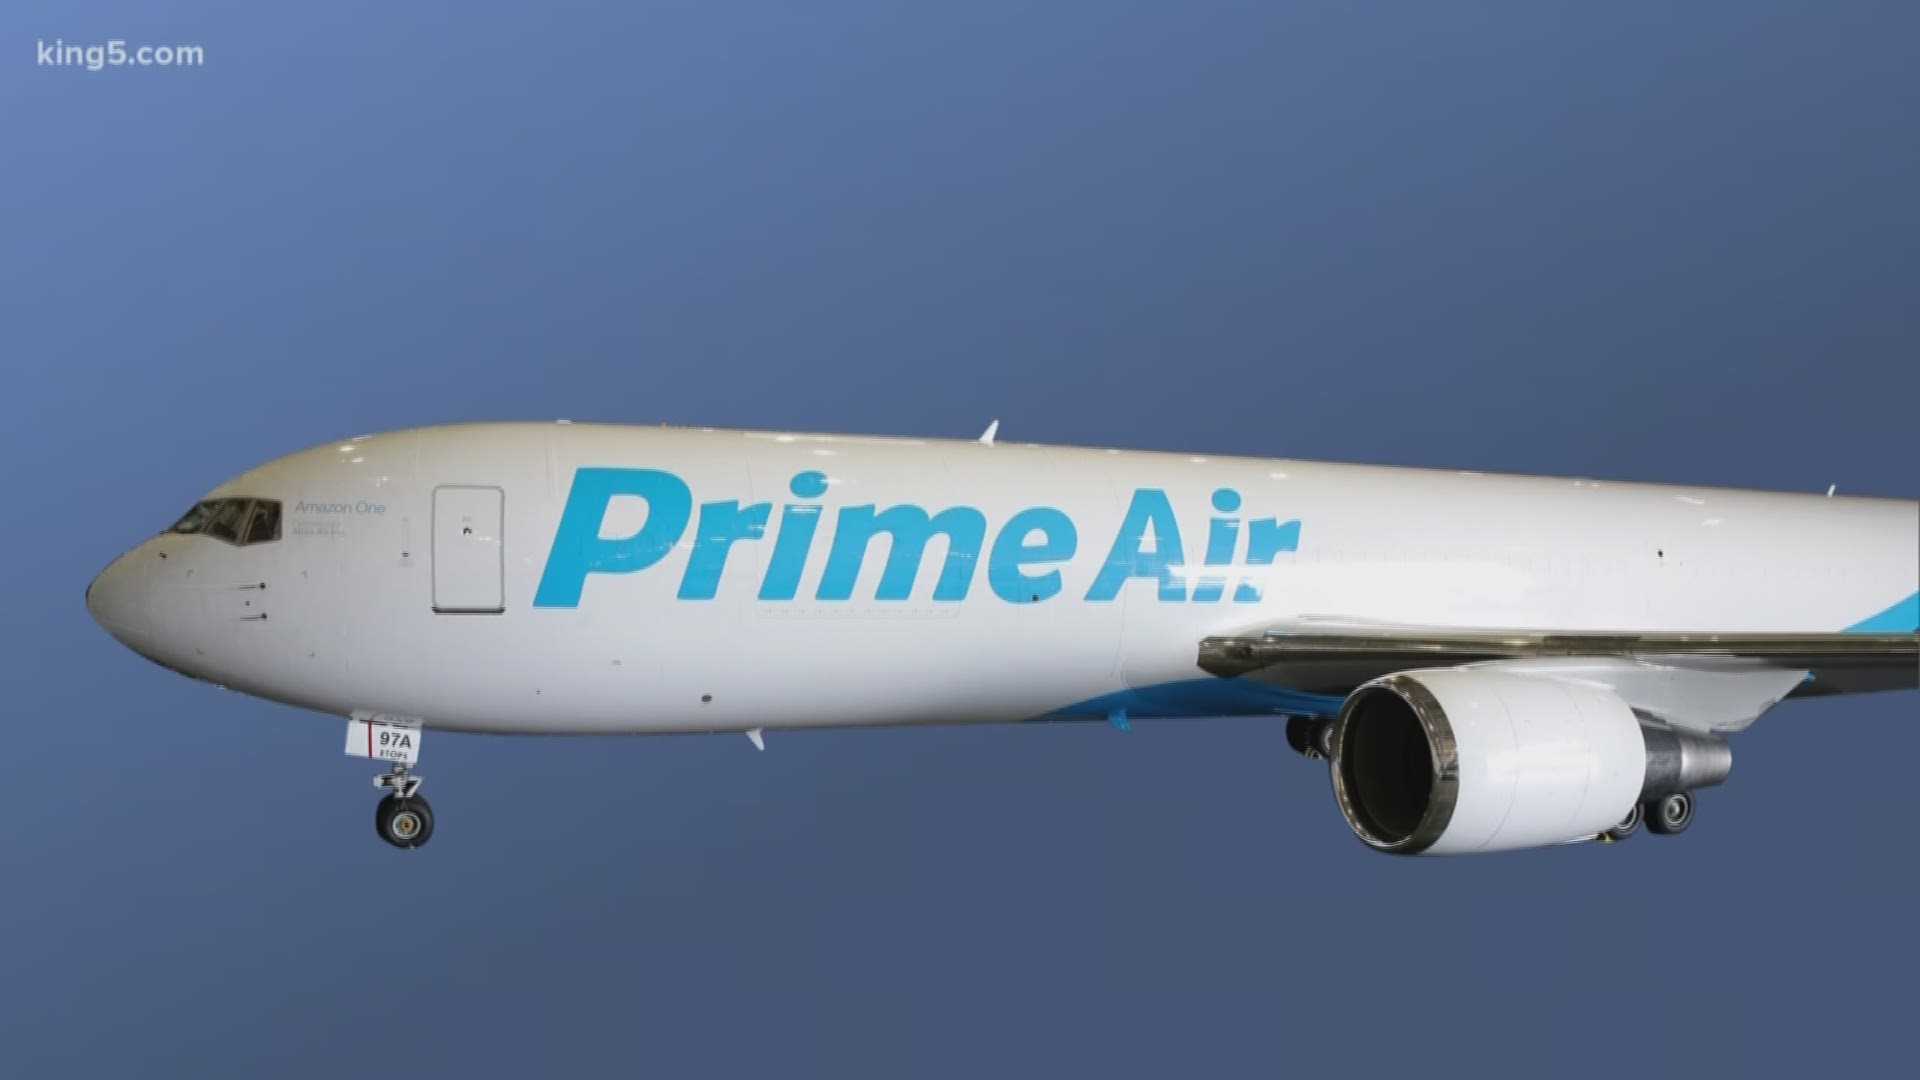 Amazon has added new Boeing 737 planes to its fleet.